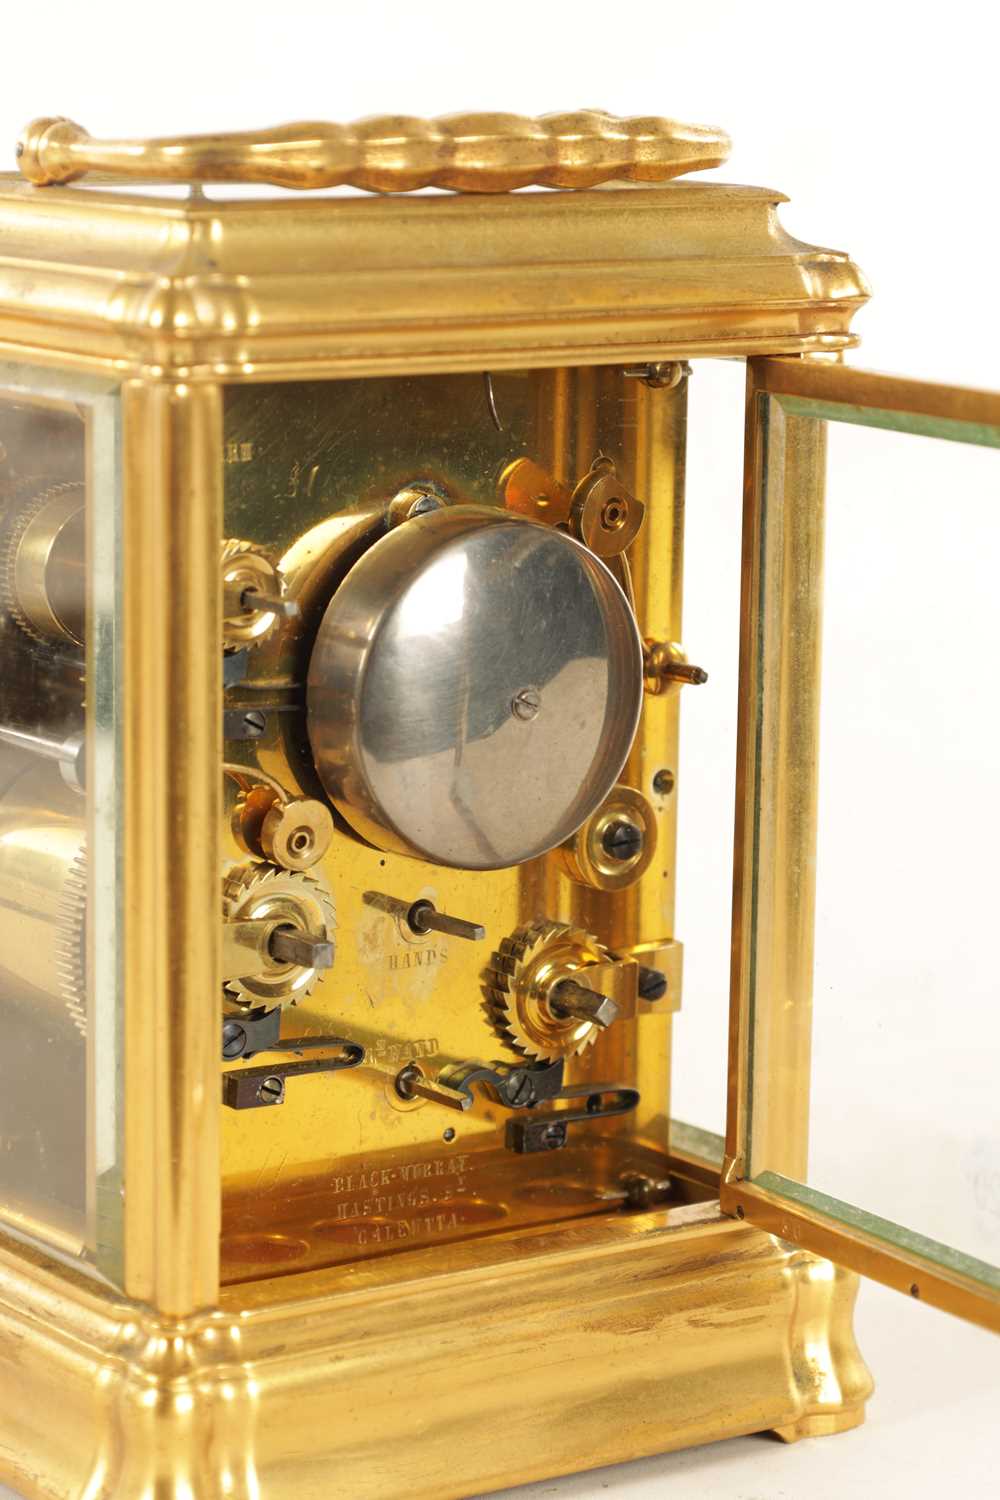 A GOOD 19TH CENTURY FRENCH REPEATING CARRIAGE CLOCK WITH ALARM - Image 8 of 15